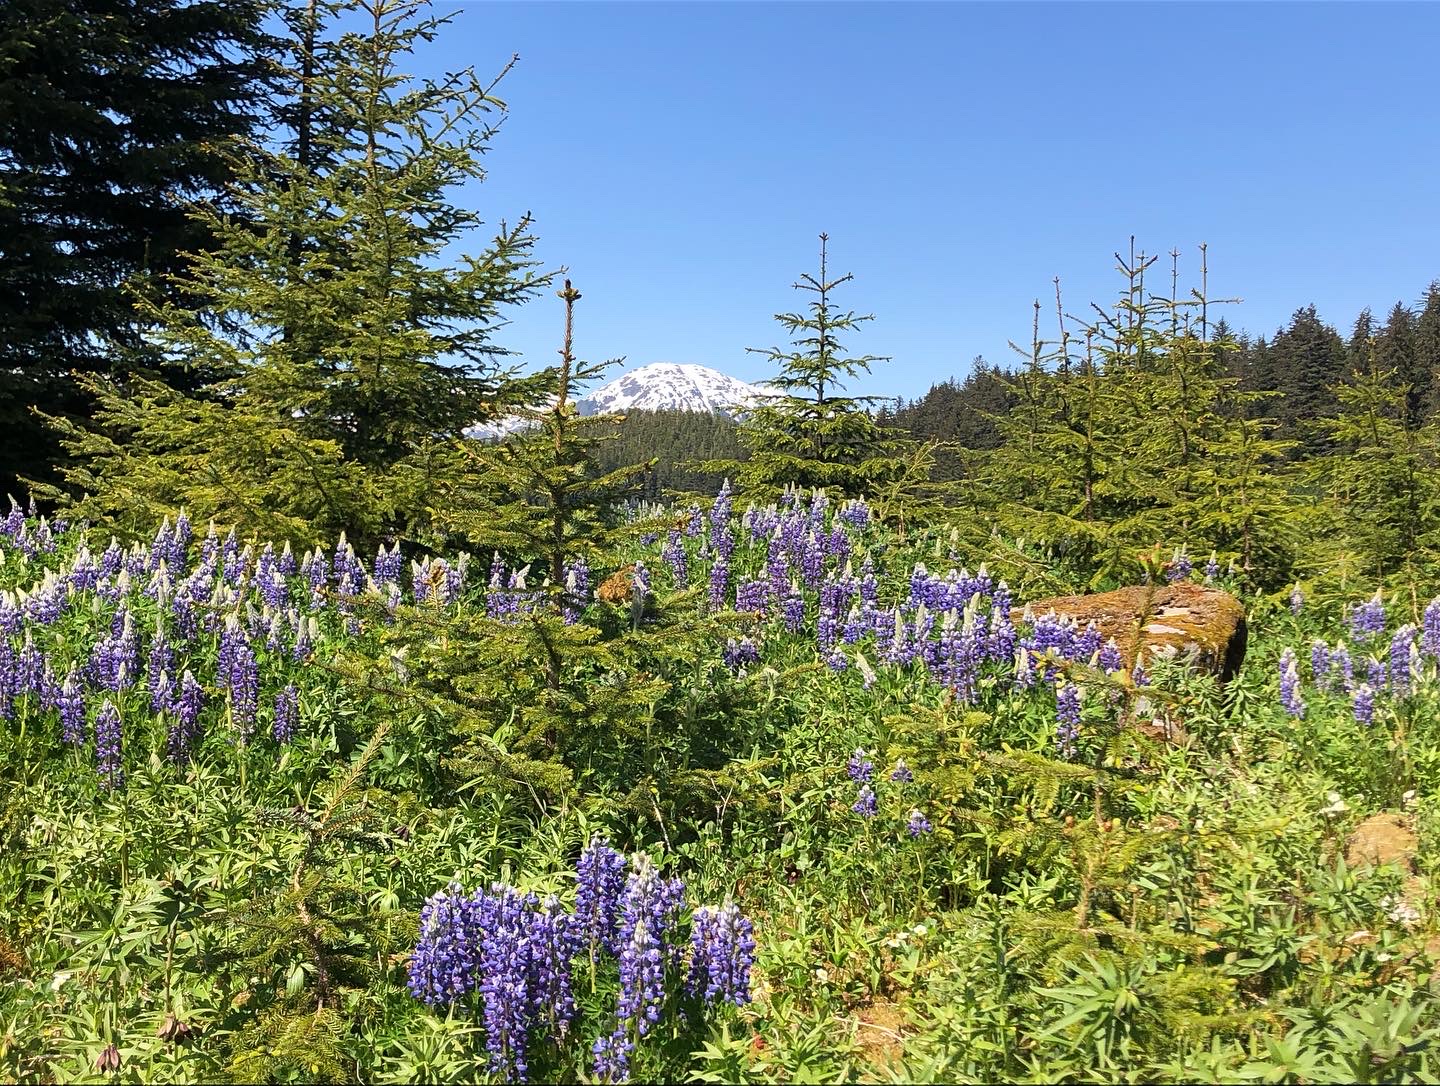 A meadow of purple and brown wild flowers surrounded by pine trees below a snowy mountain peak.